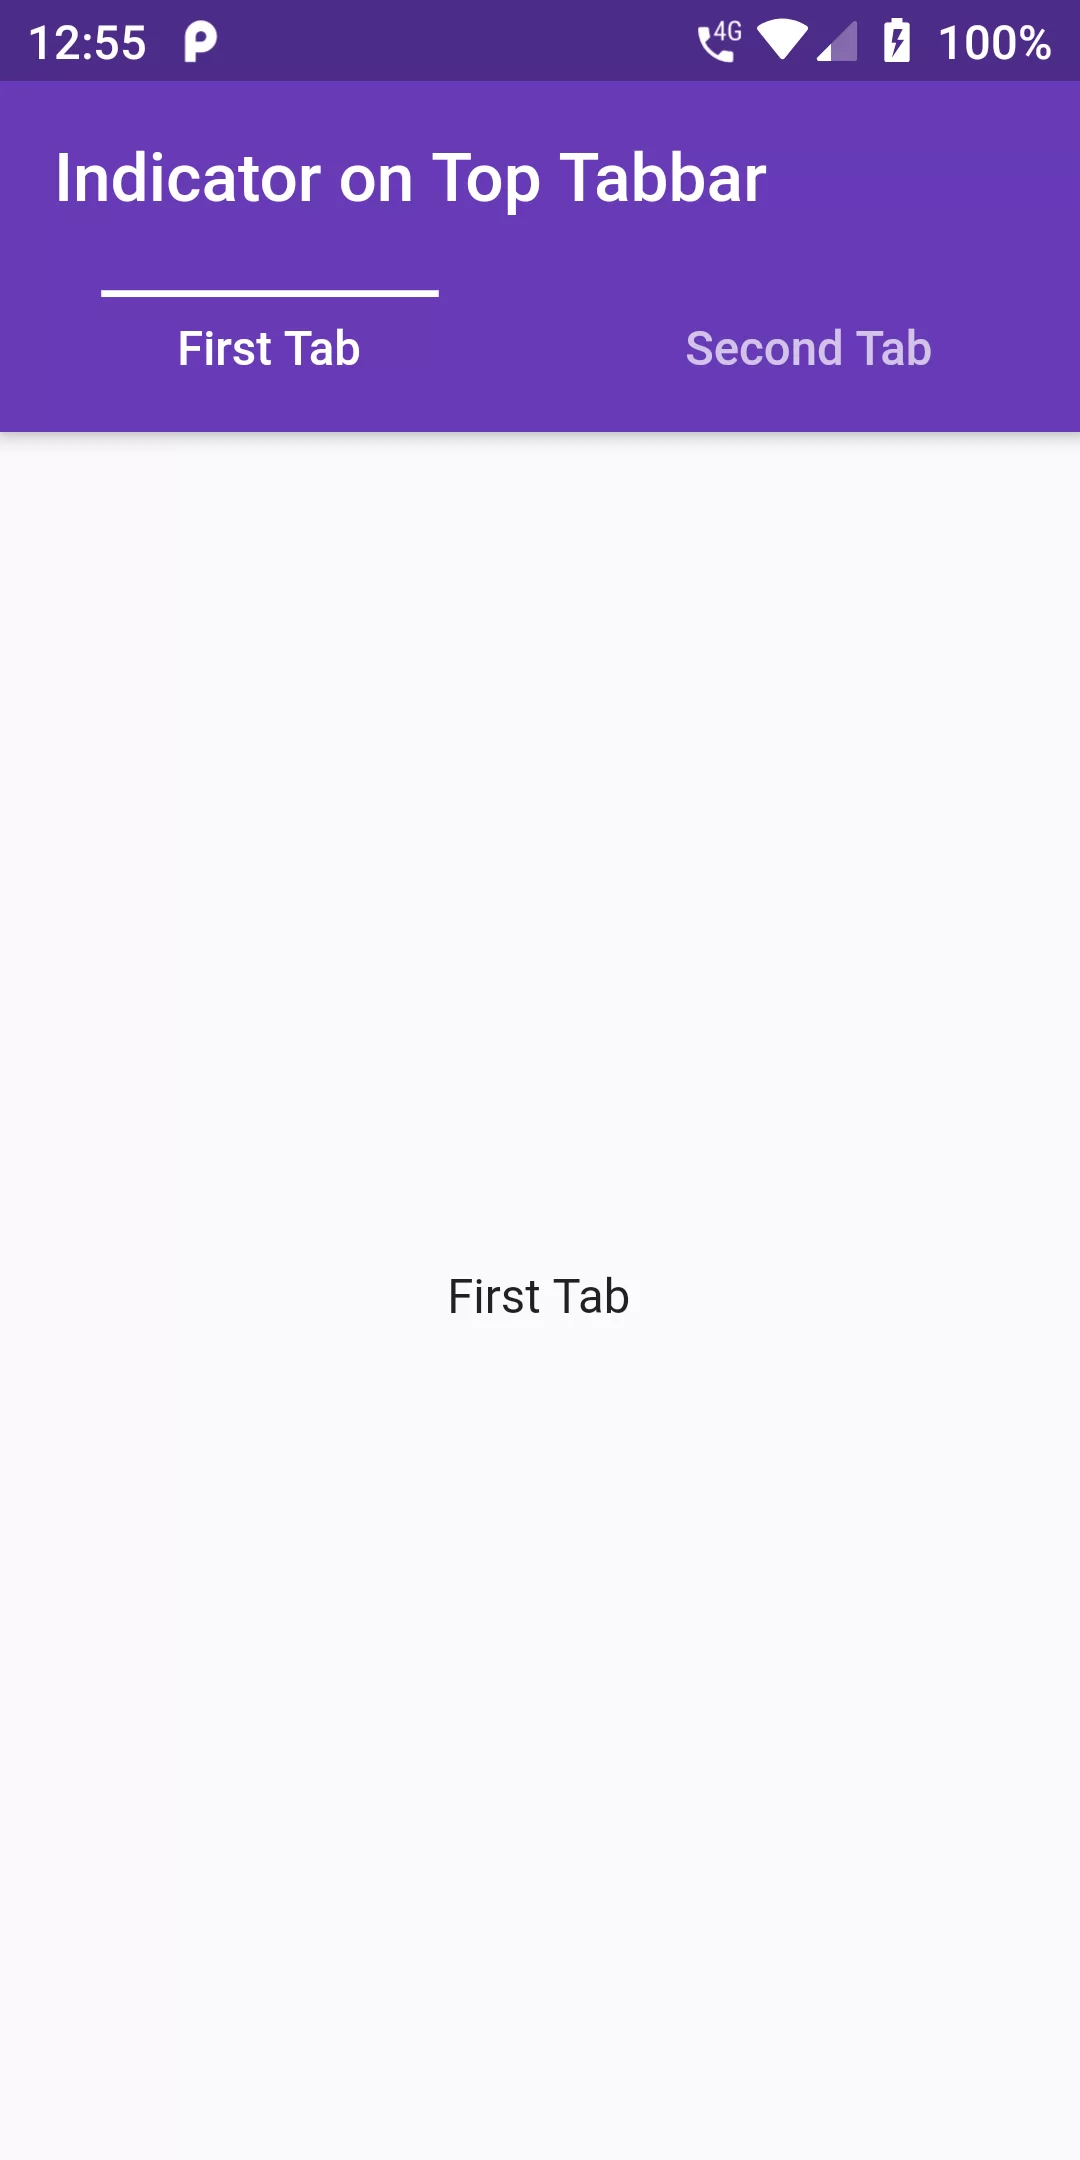 How To Add Indicator On Top Tabbar Using Flutter Android